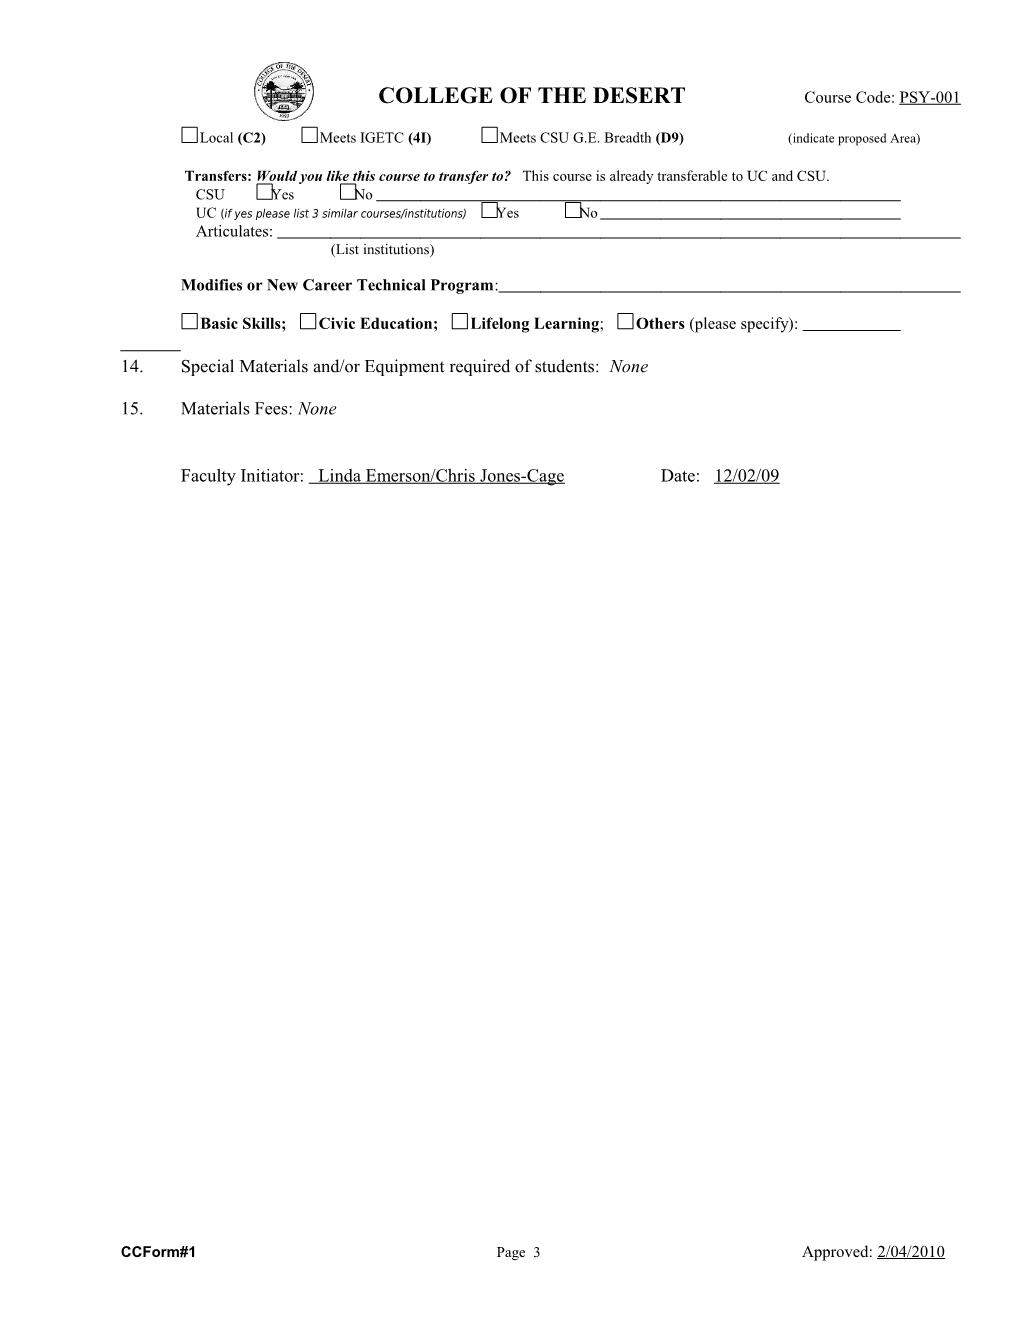 Course Outline of Record Form